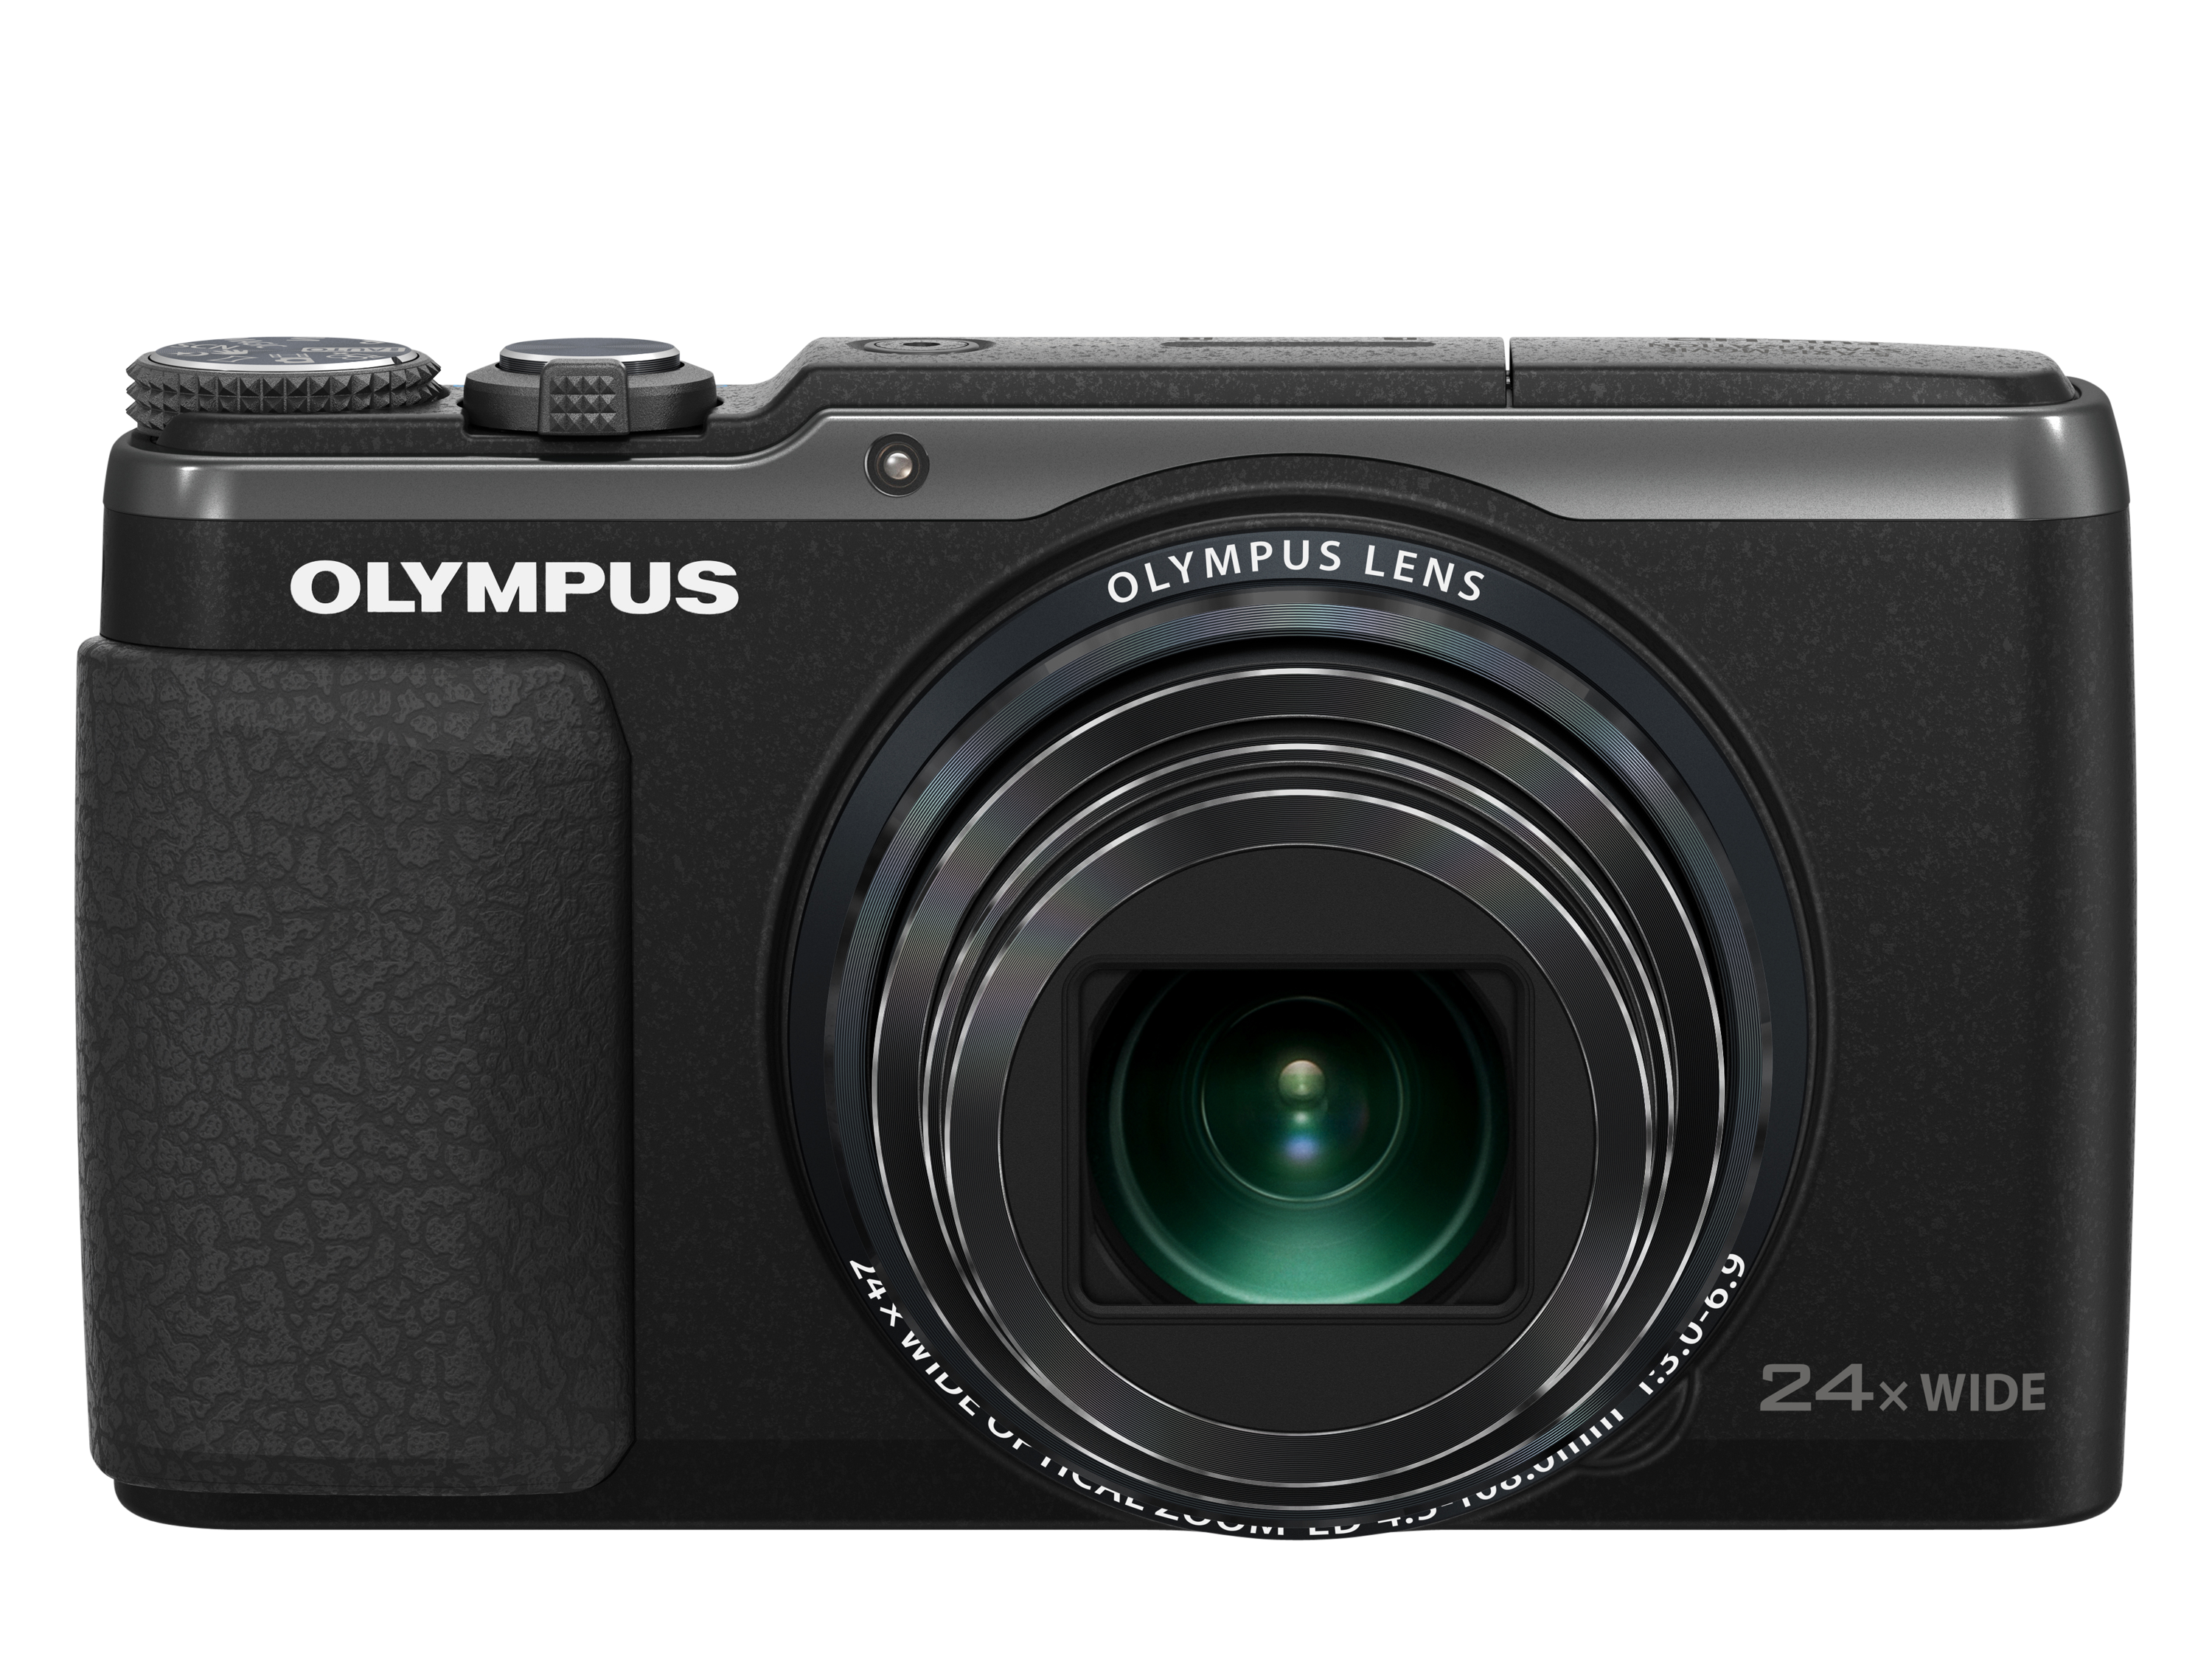 Olympus STYLUS Traveller SH-50.Foto: Olympus, All Rights Reserved